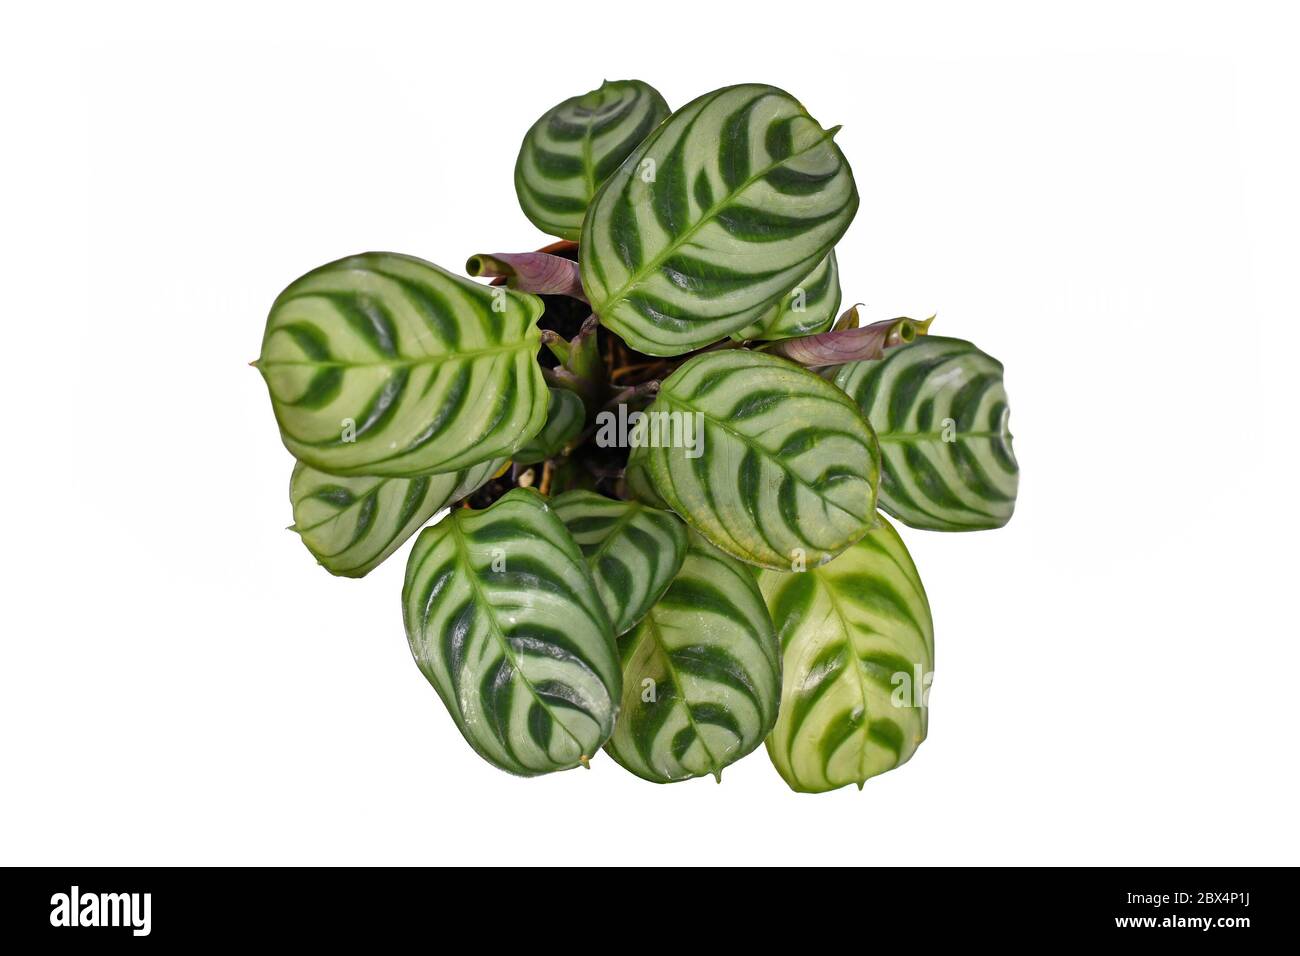 Tropical 'Ctenanthe Burle Marxii' house plant with exotic stripe pattern on leaves on white background Stock Photo